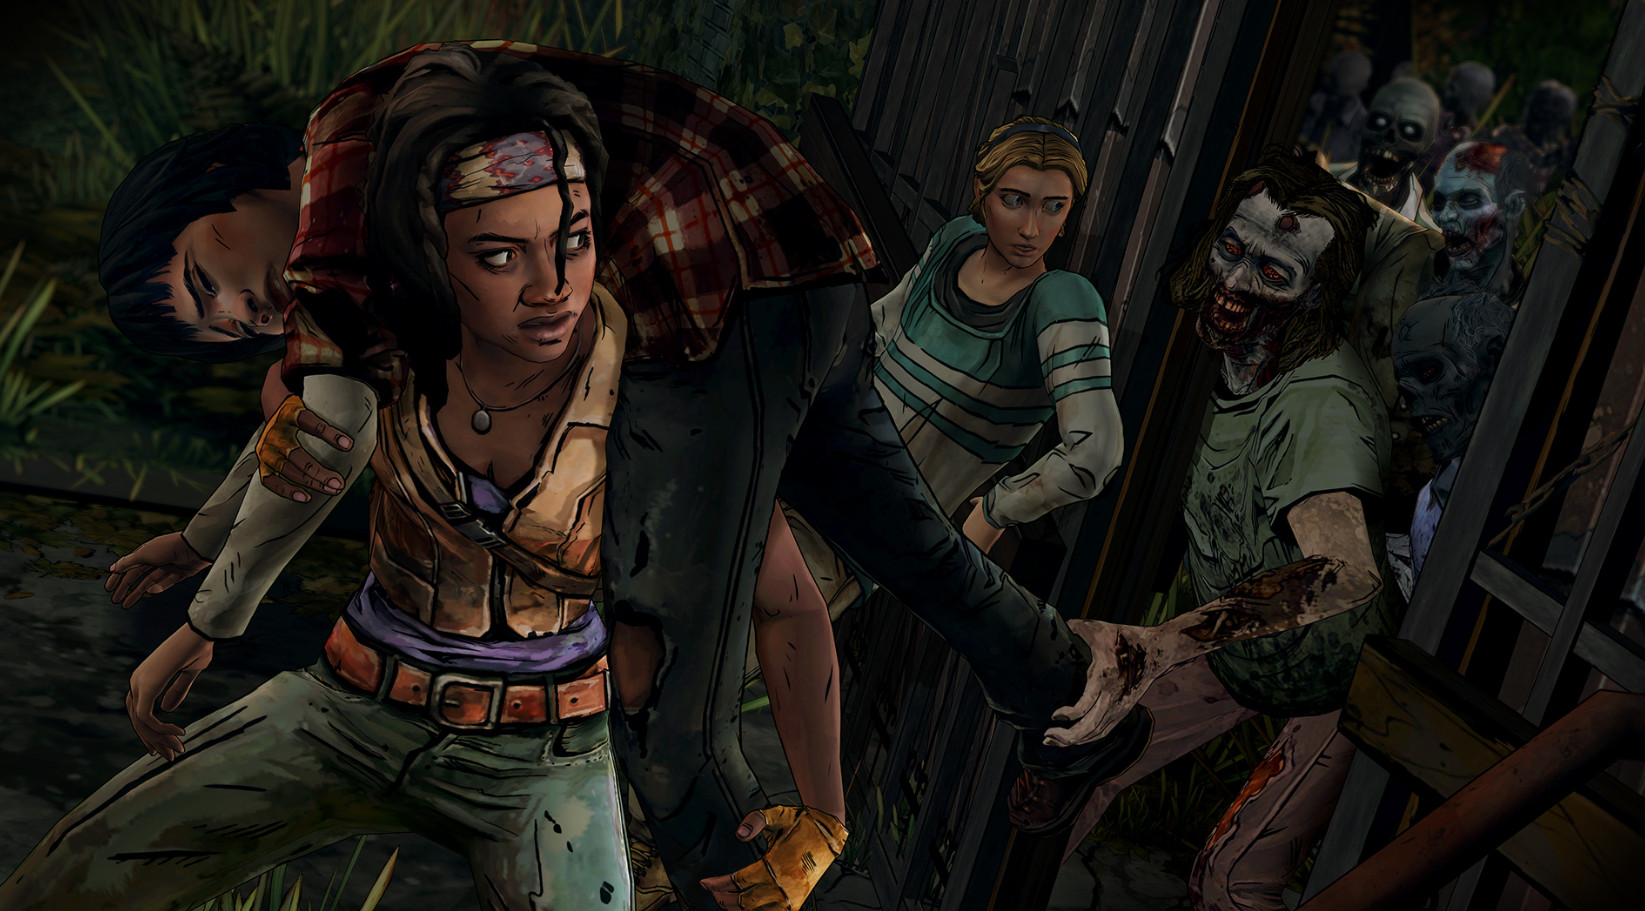 TWD Michonne ep2 Give No Shelter #2